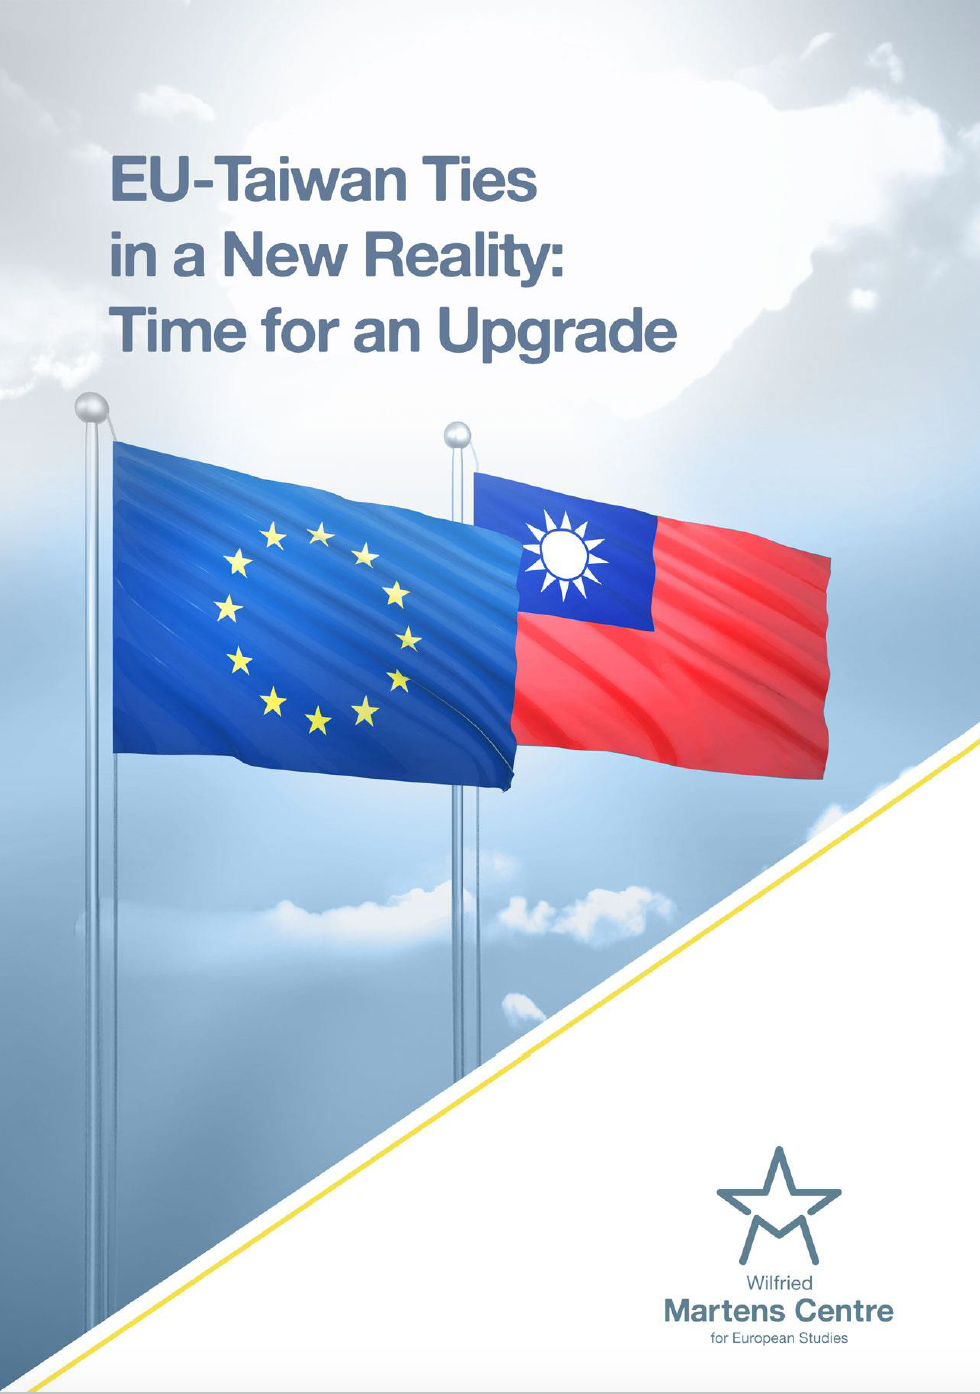 EU-Taiwan Ties in a New Reality: Time for an Upgrade